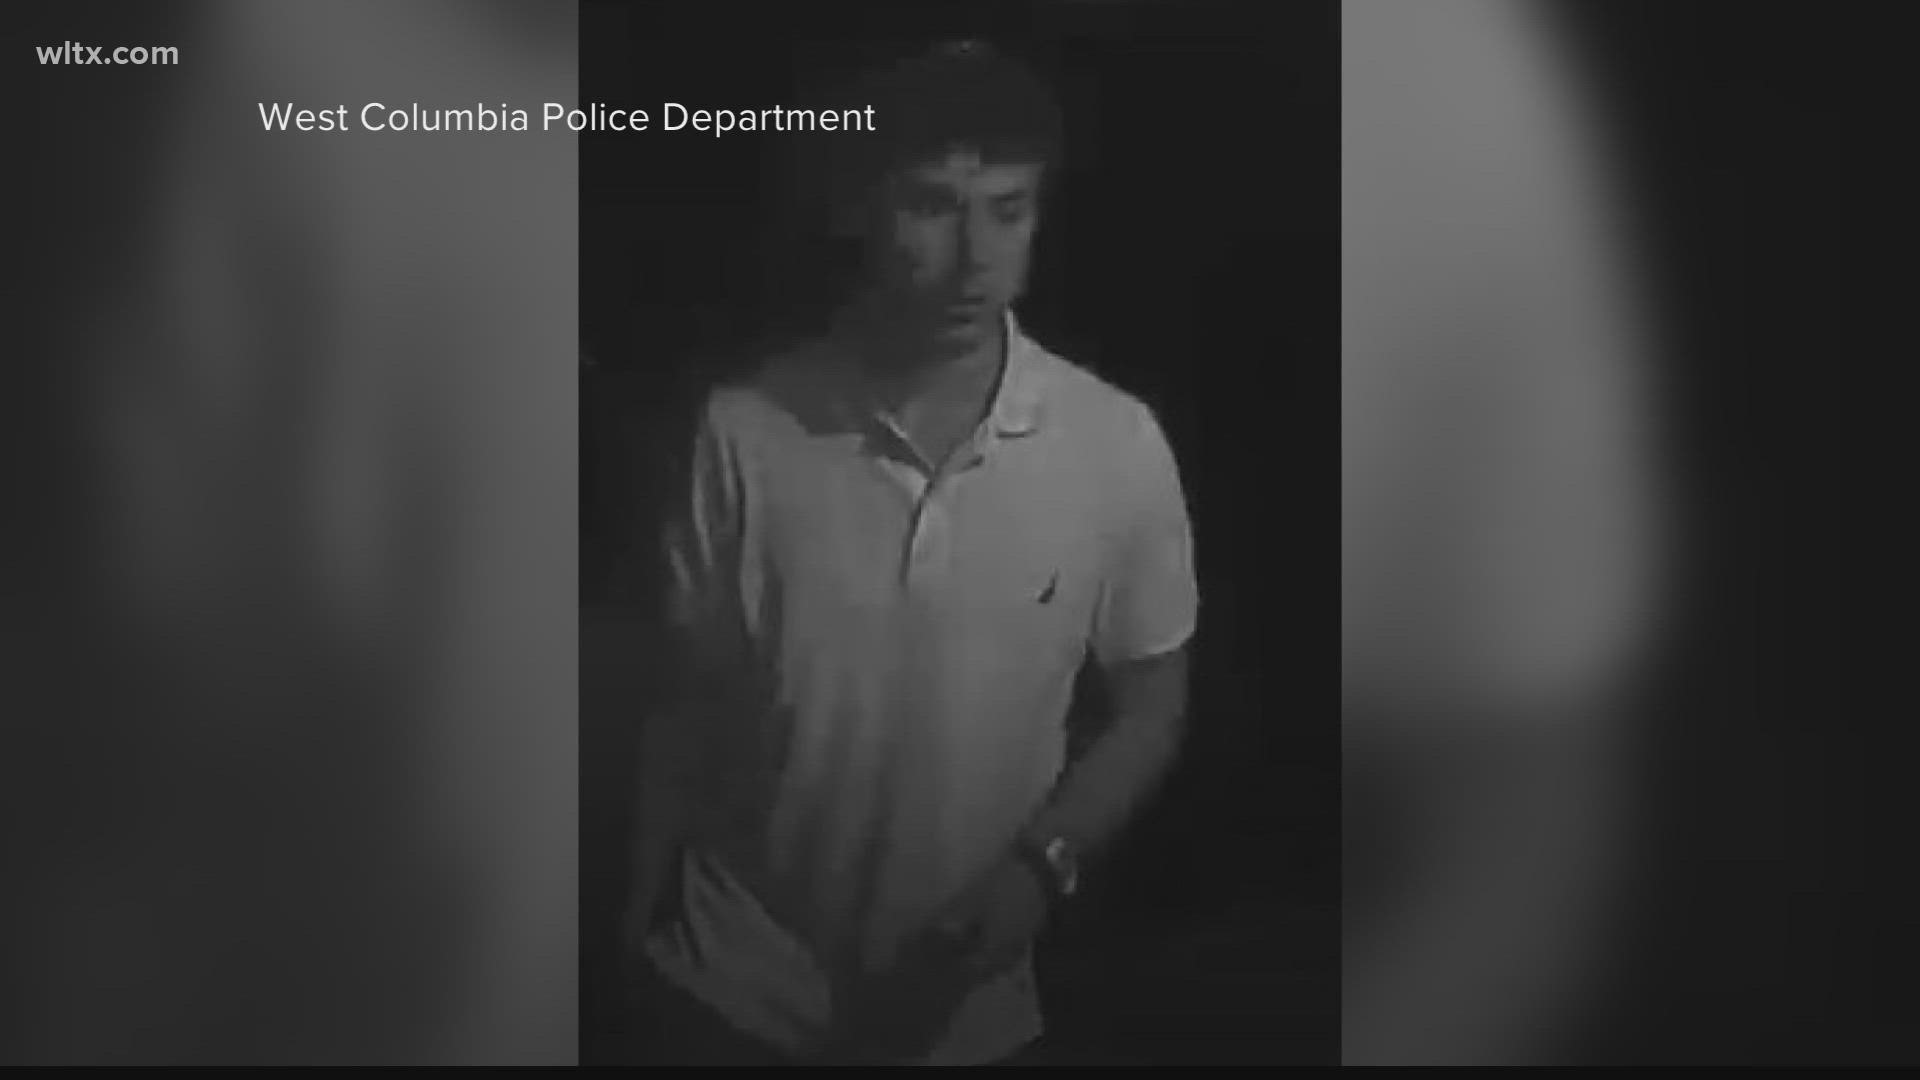 Police are hoping the community can help them identify the suspect who is believed to have broken into a number of homes in the area.